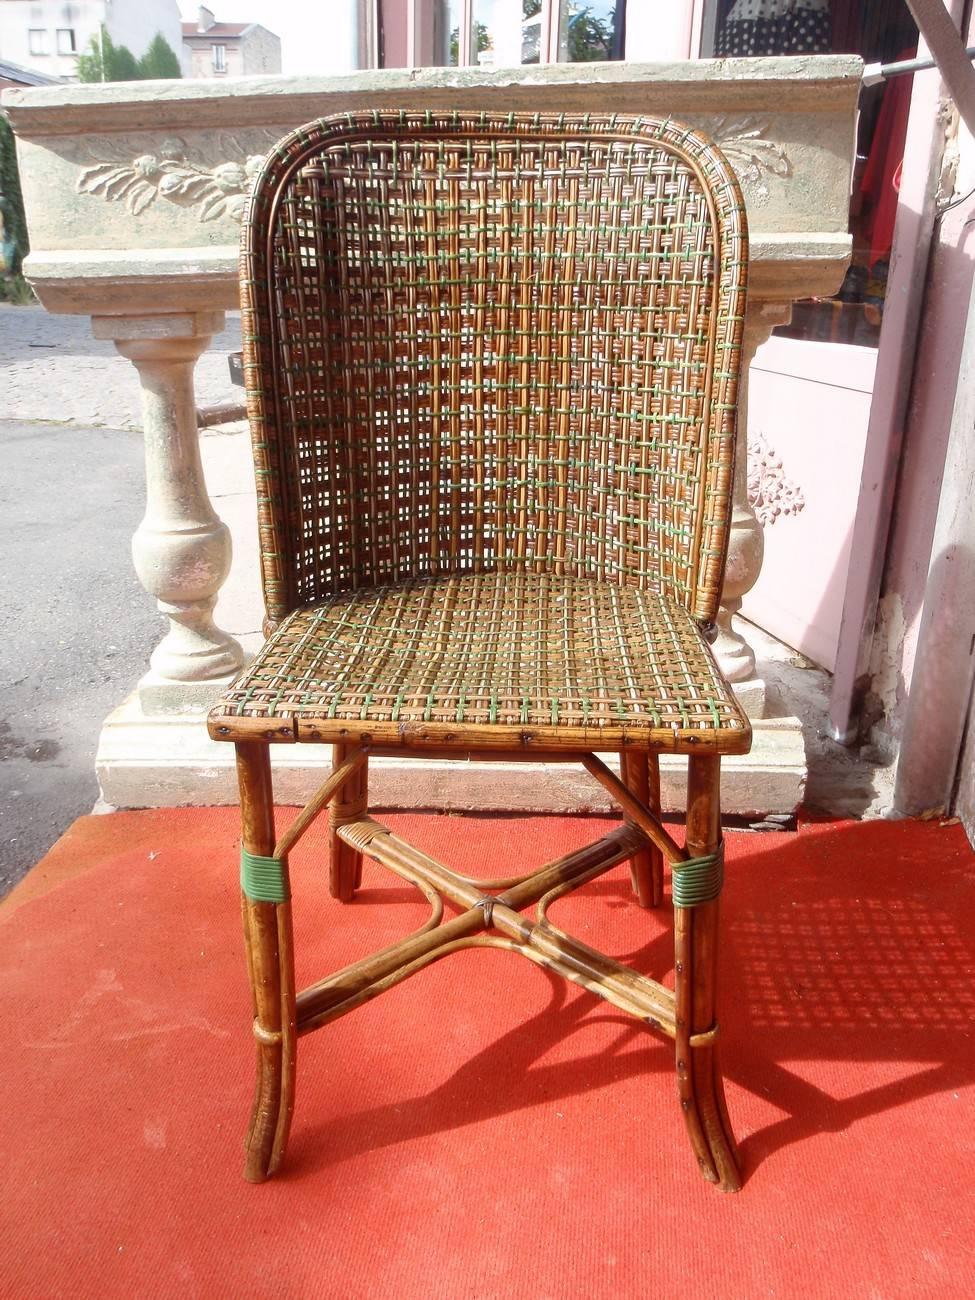 20th Century Natural Rattan Chair, French Manufacture, circa 1900-1920 For Sale